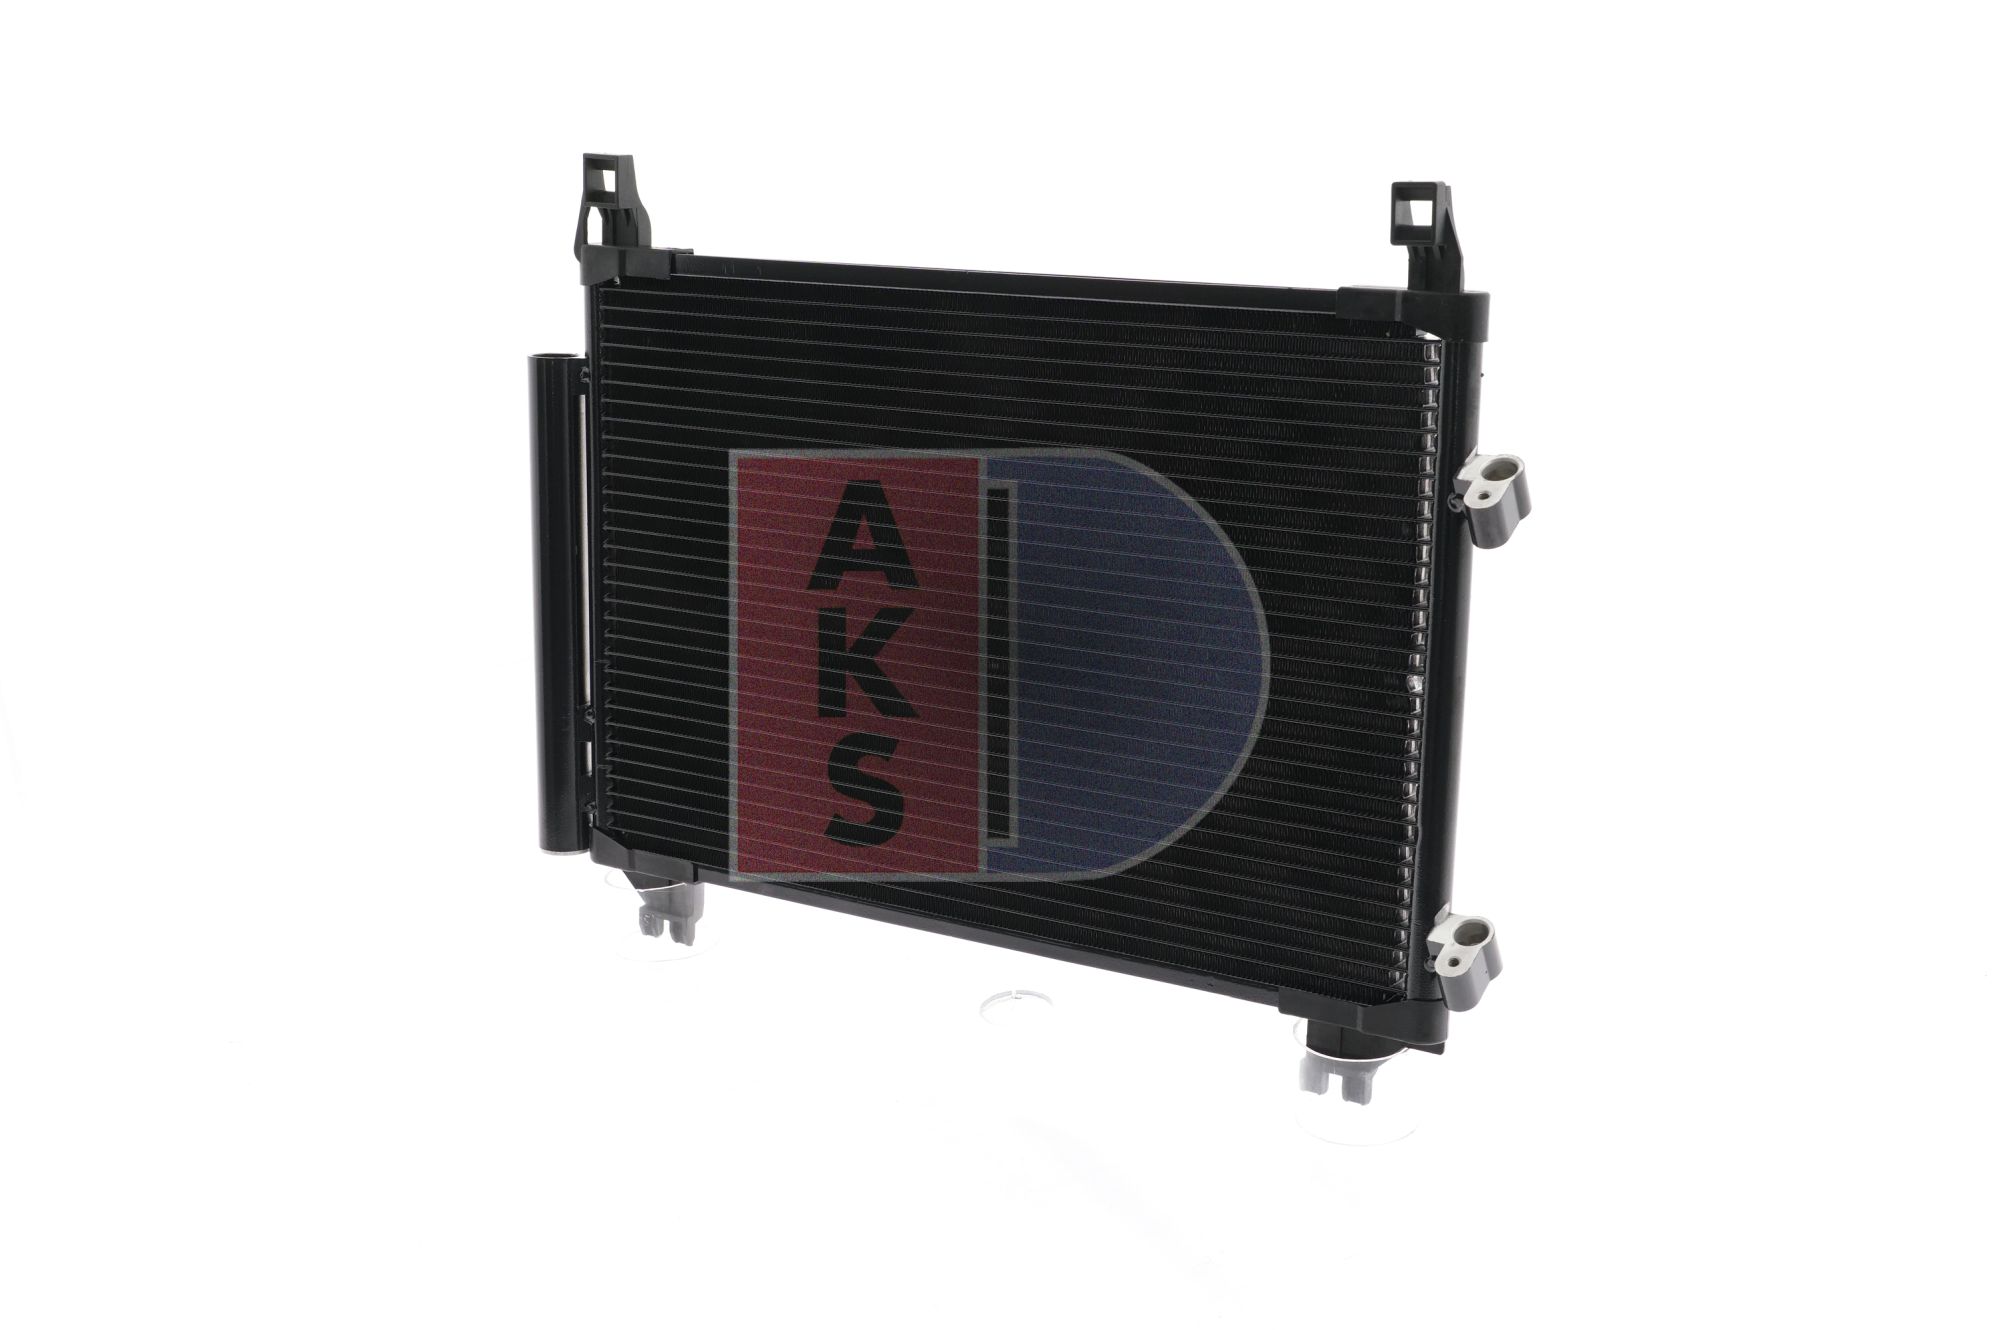 Toyota Air conditioning condenser AKS DASIS 212055N at a good price